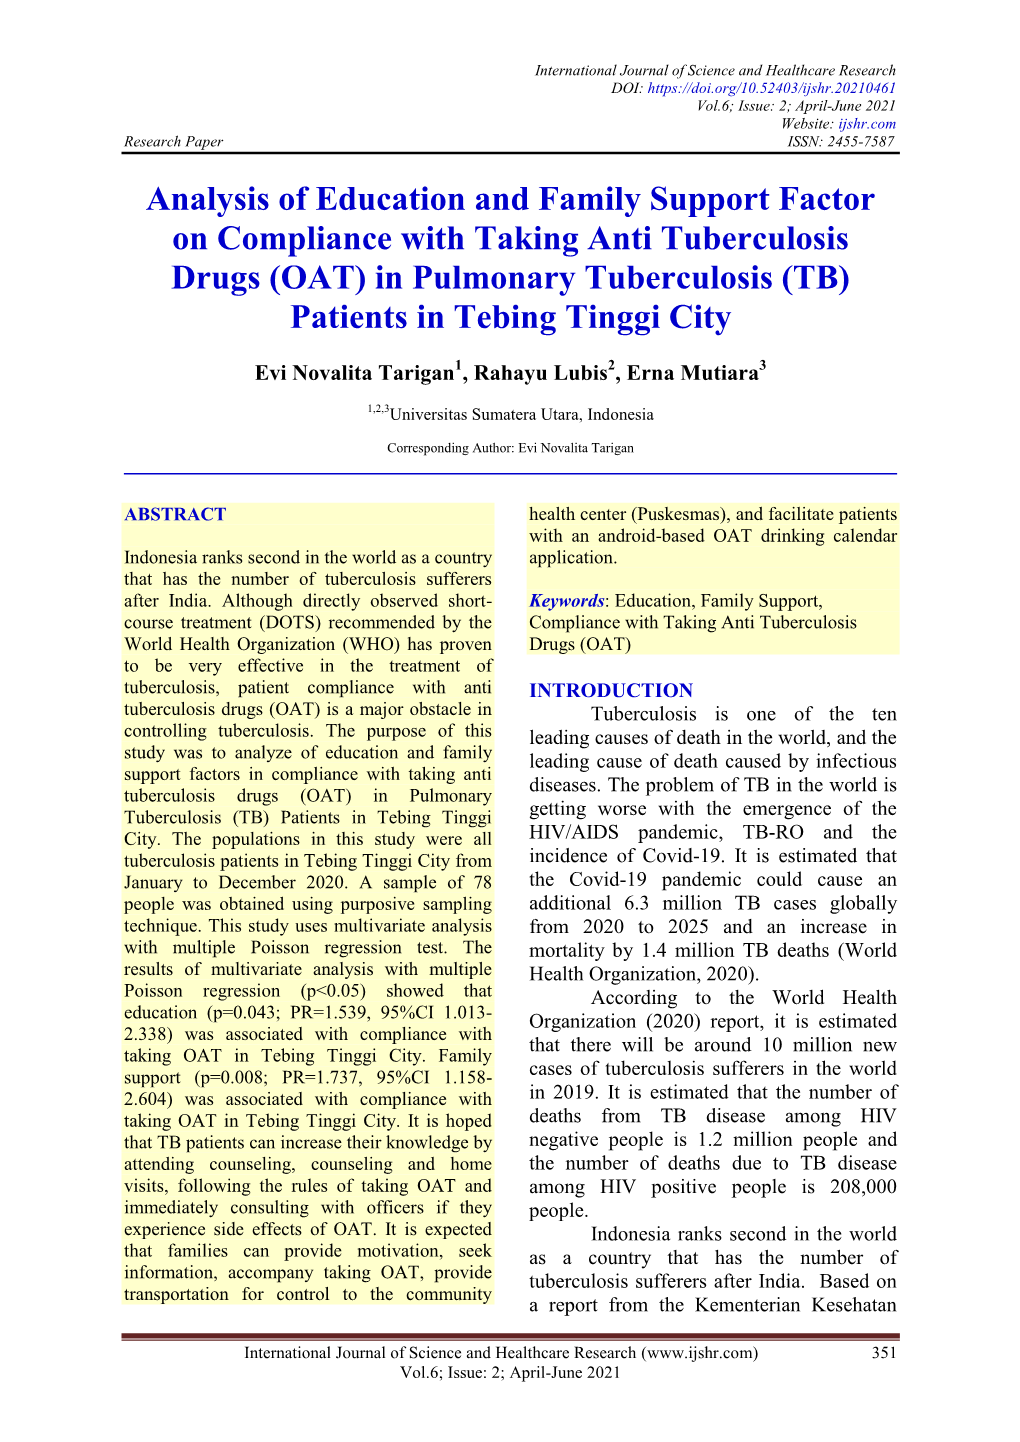 Analysis of Education and Family Support Factor on Compliance with Taking Anti Tuberculosis Drugs (OAT) in Pulmonary Tuberculosis (TB) Patients in Tebing Tinggi City